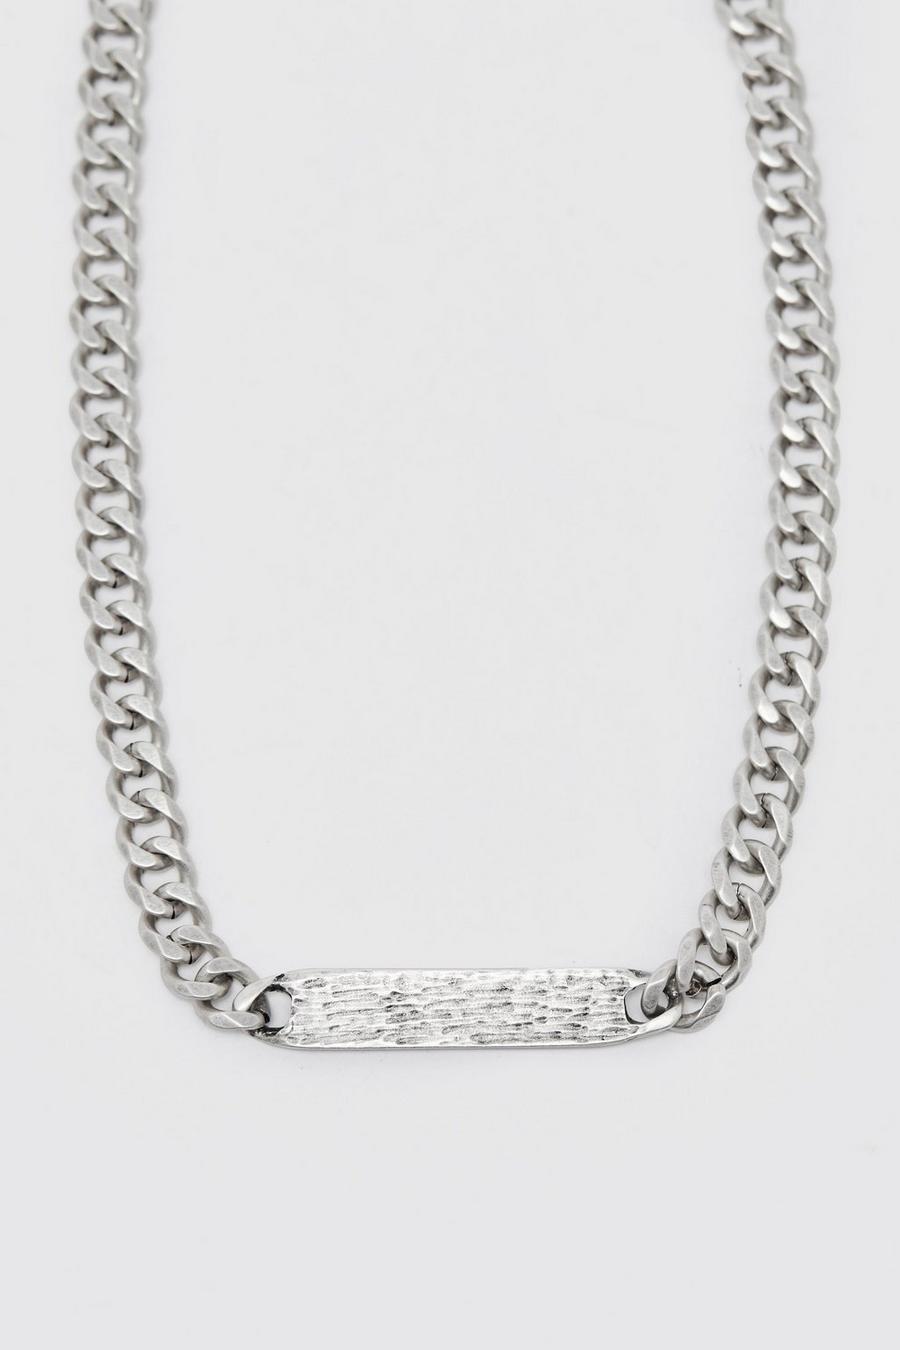 Silver Heavy Weight Chain Bar Necklace